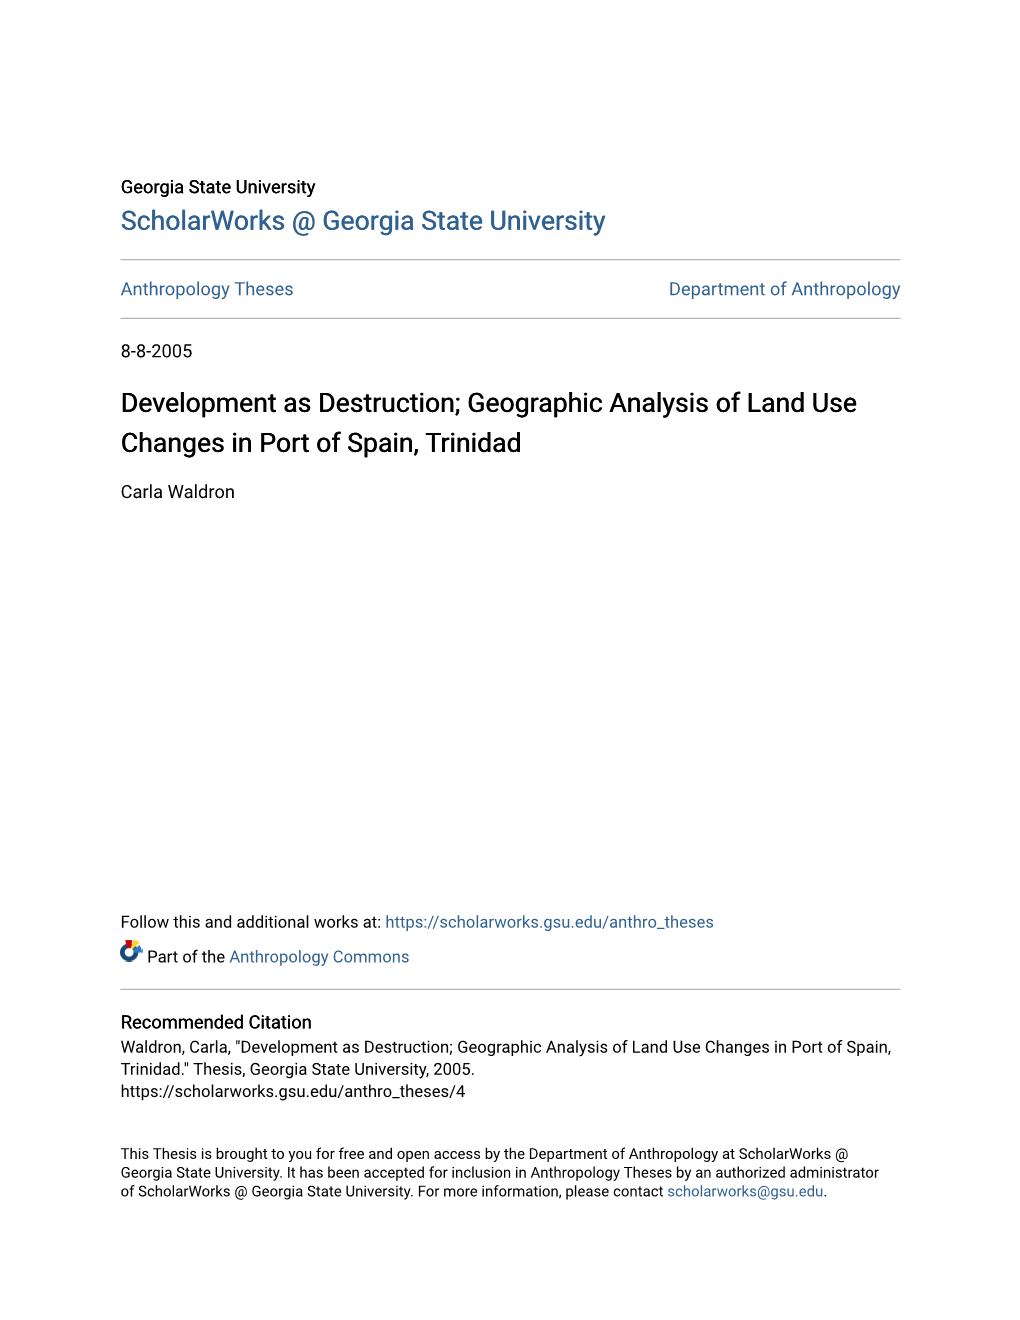 Geographic Analysis of Land Use Changes in Port of Spain, Trinidad